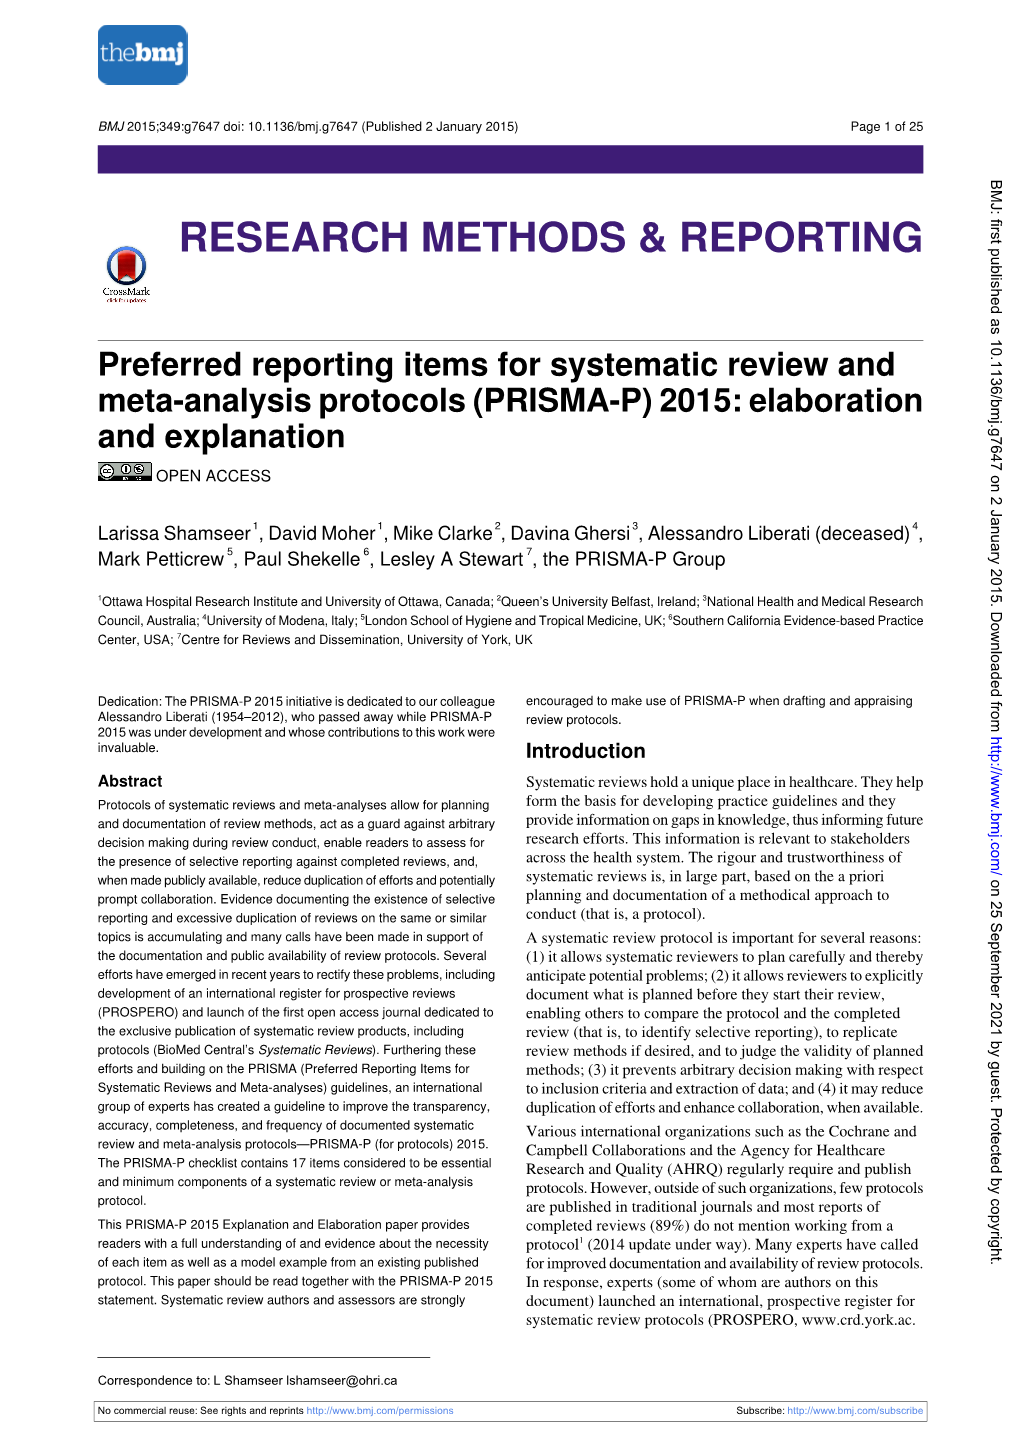 Preferred Reporting Items for Systematic Review and Meta-Analysis Protocols (PRISMA-P) 2015: Elaboration and Explanation OPEN ACCESS